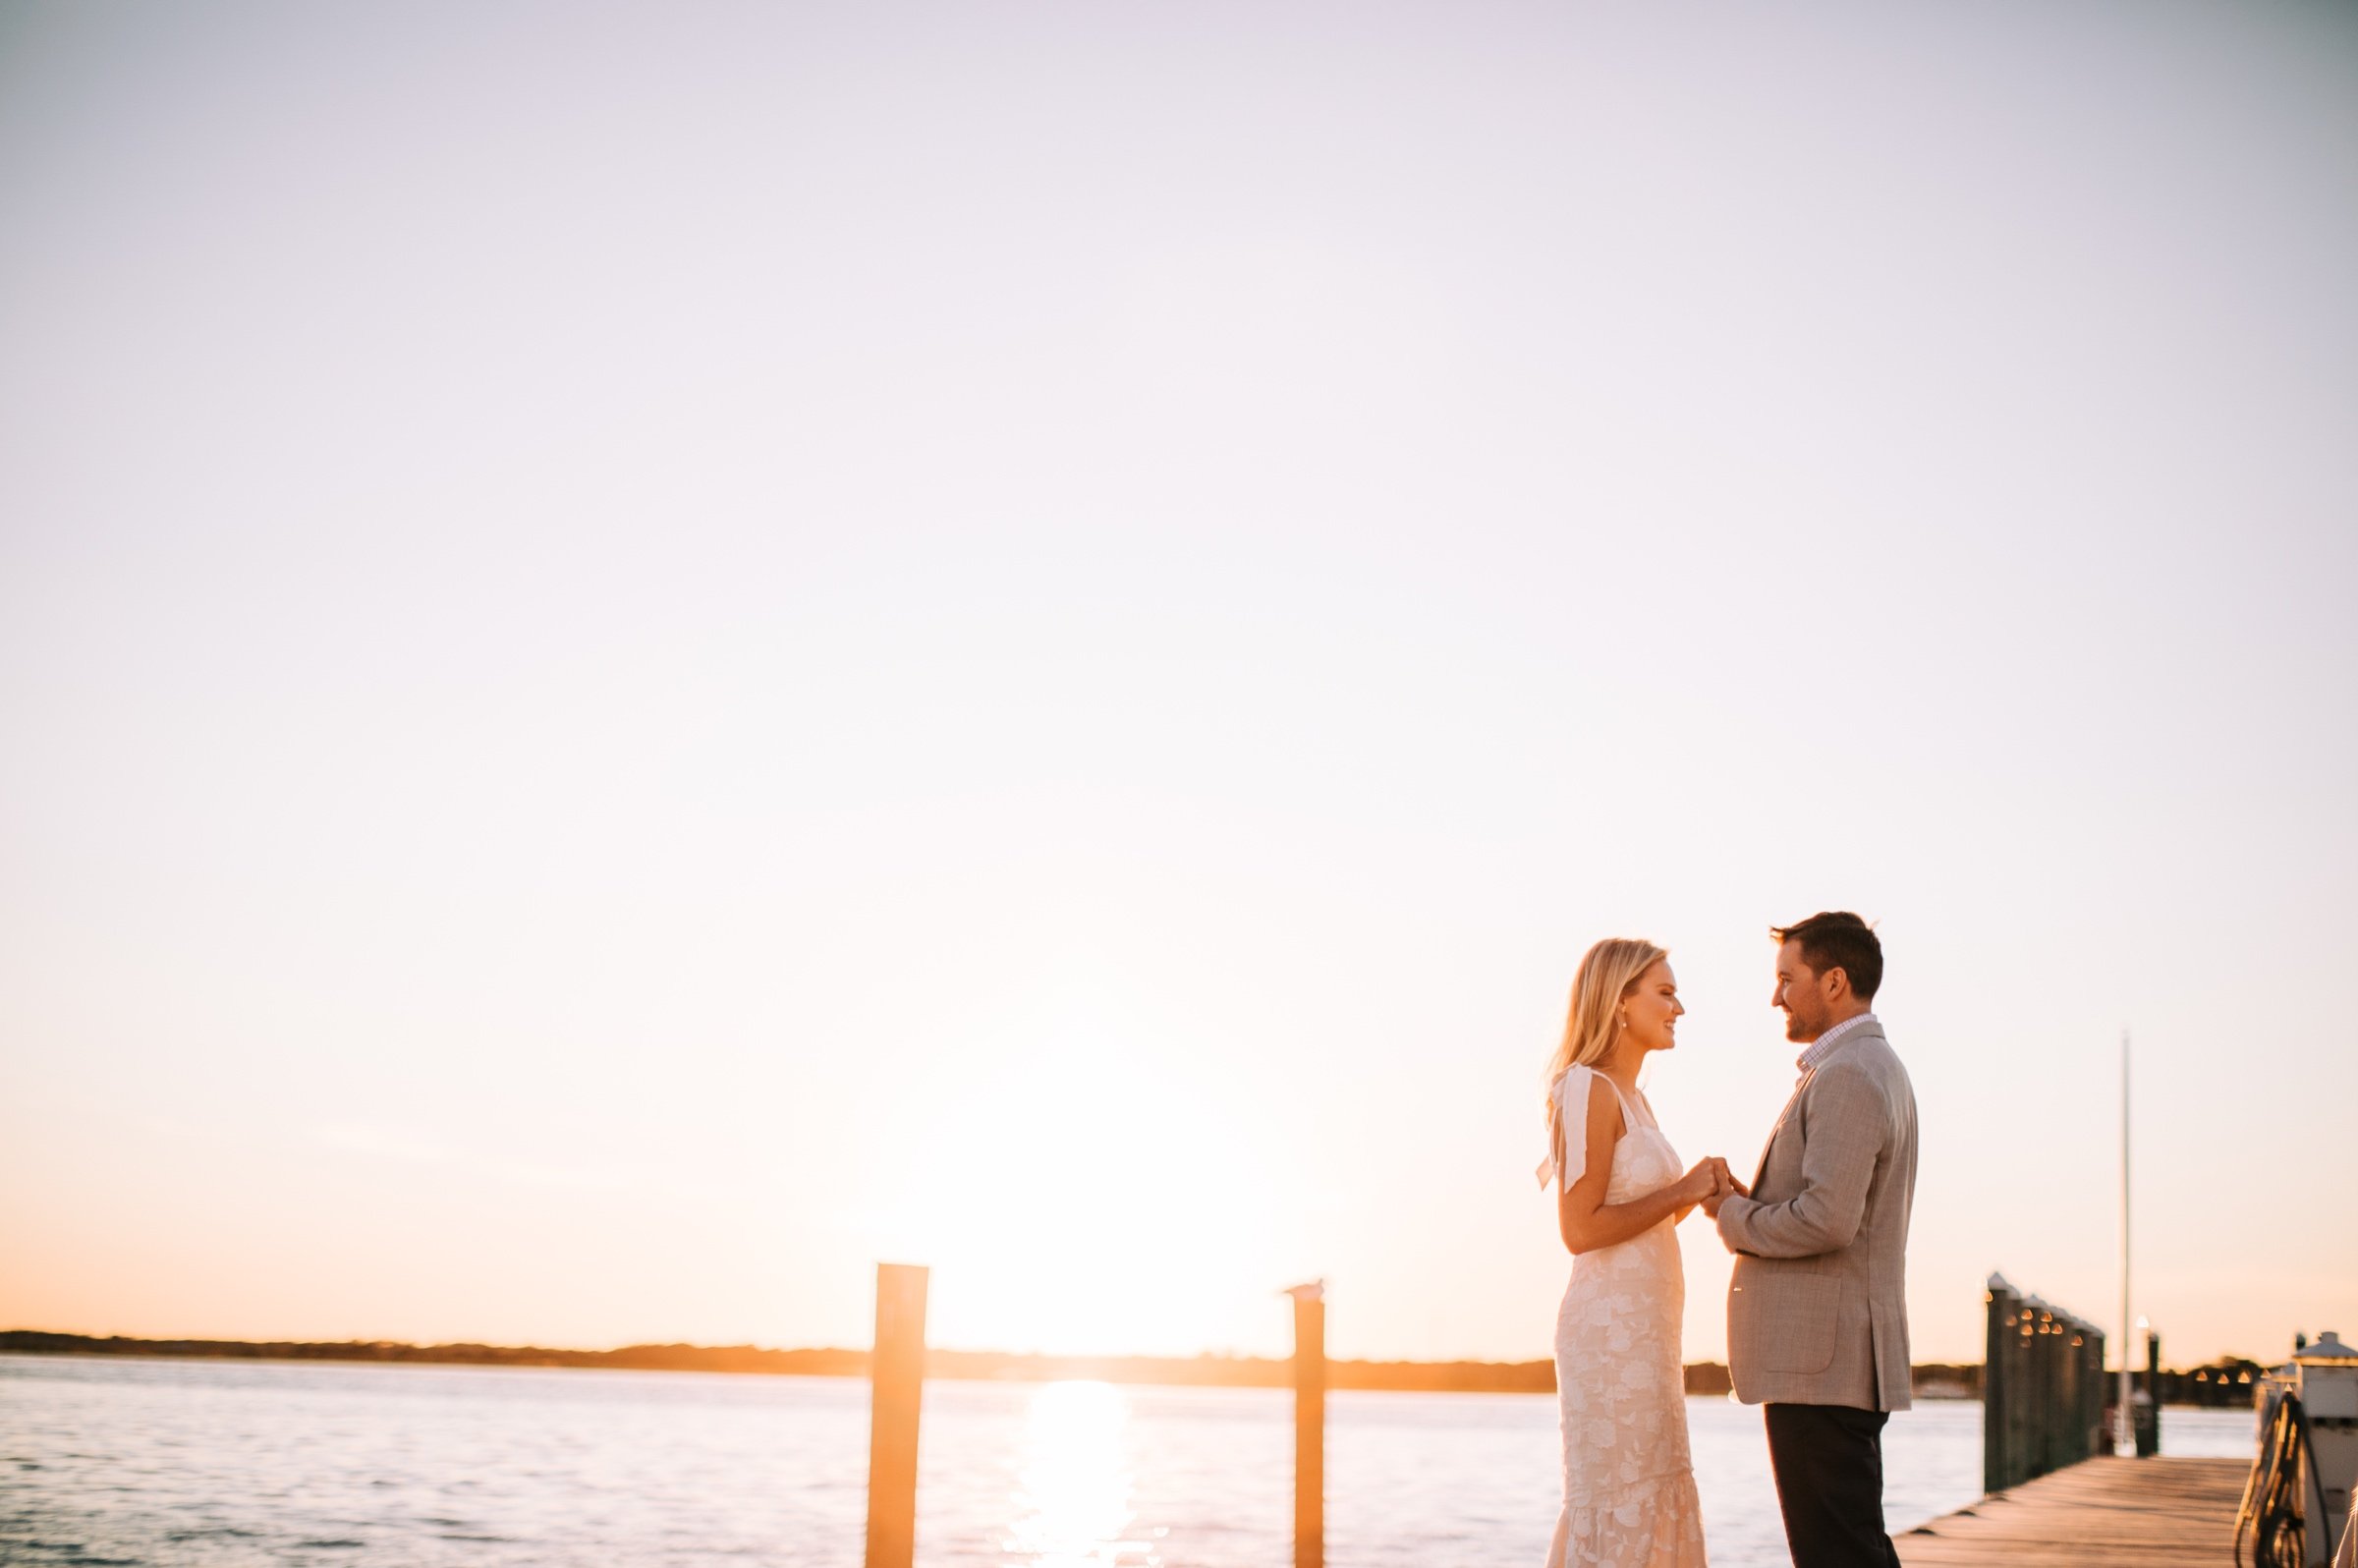 07_sunset couples portraits at mantoloking yacht club.jpg